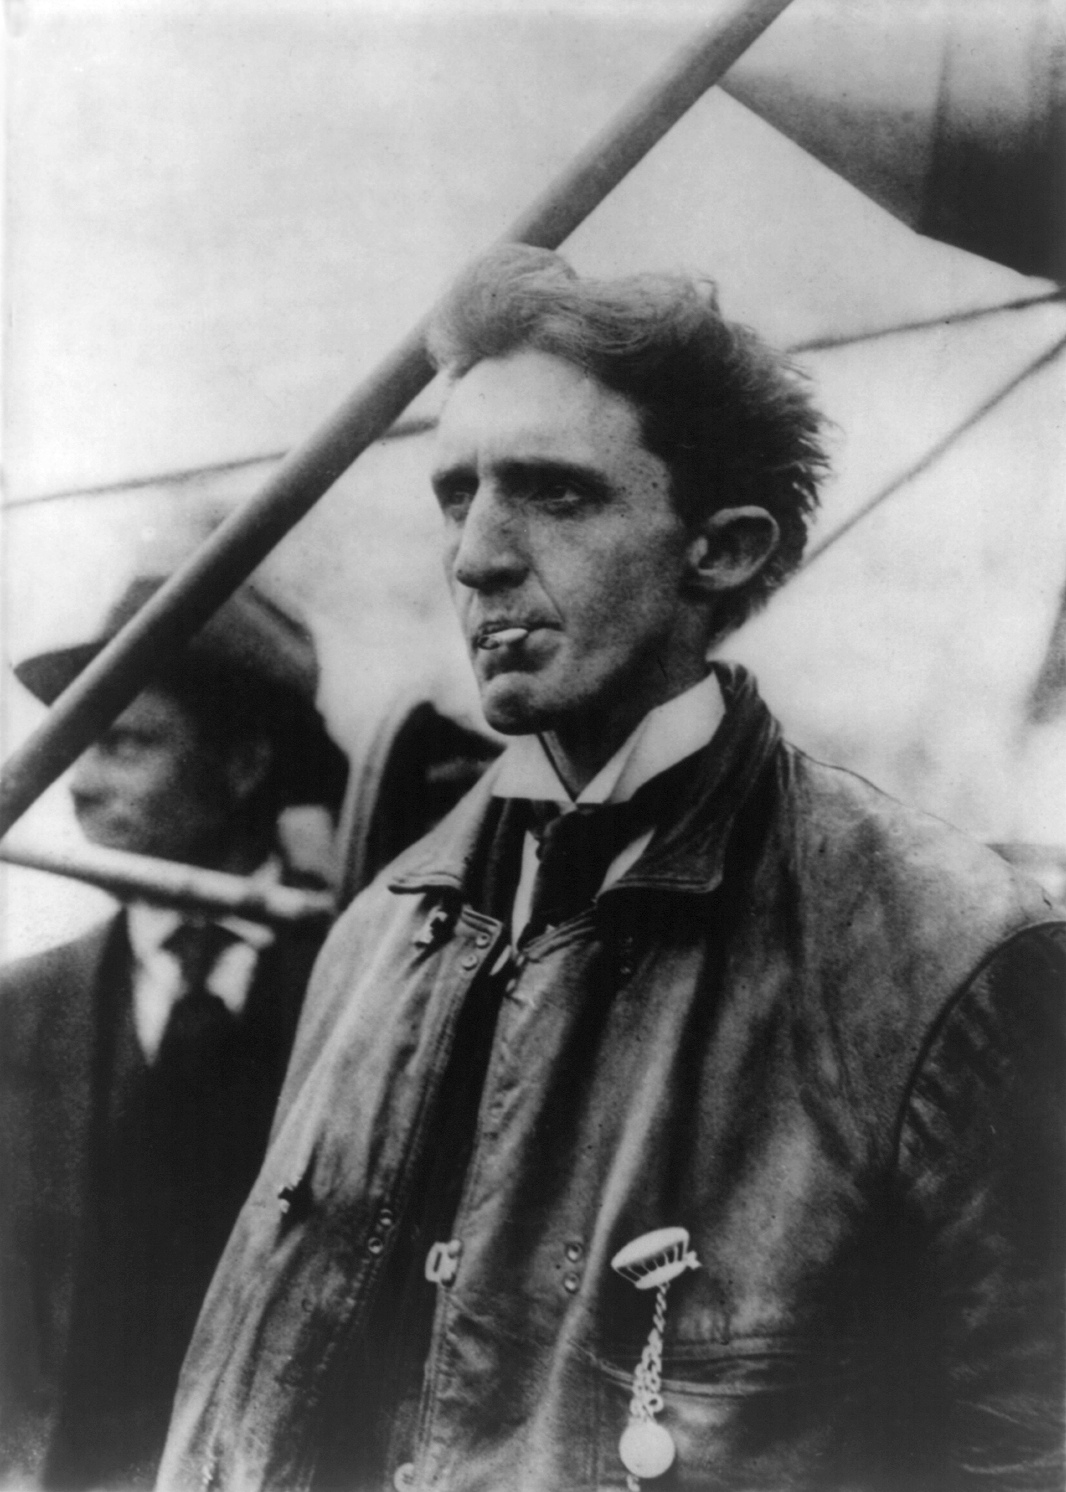 Charles K. Hamilton, aviation pioneer and aerial daredevil - known as the "Crazy Man of the Air", he survived over sixty aircraft crashes. Photo circa 1910 via wikipedia